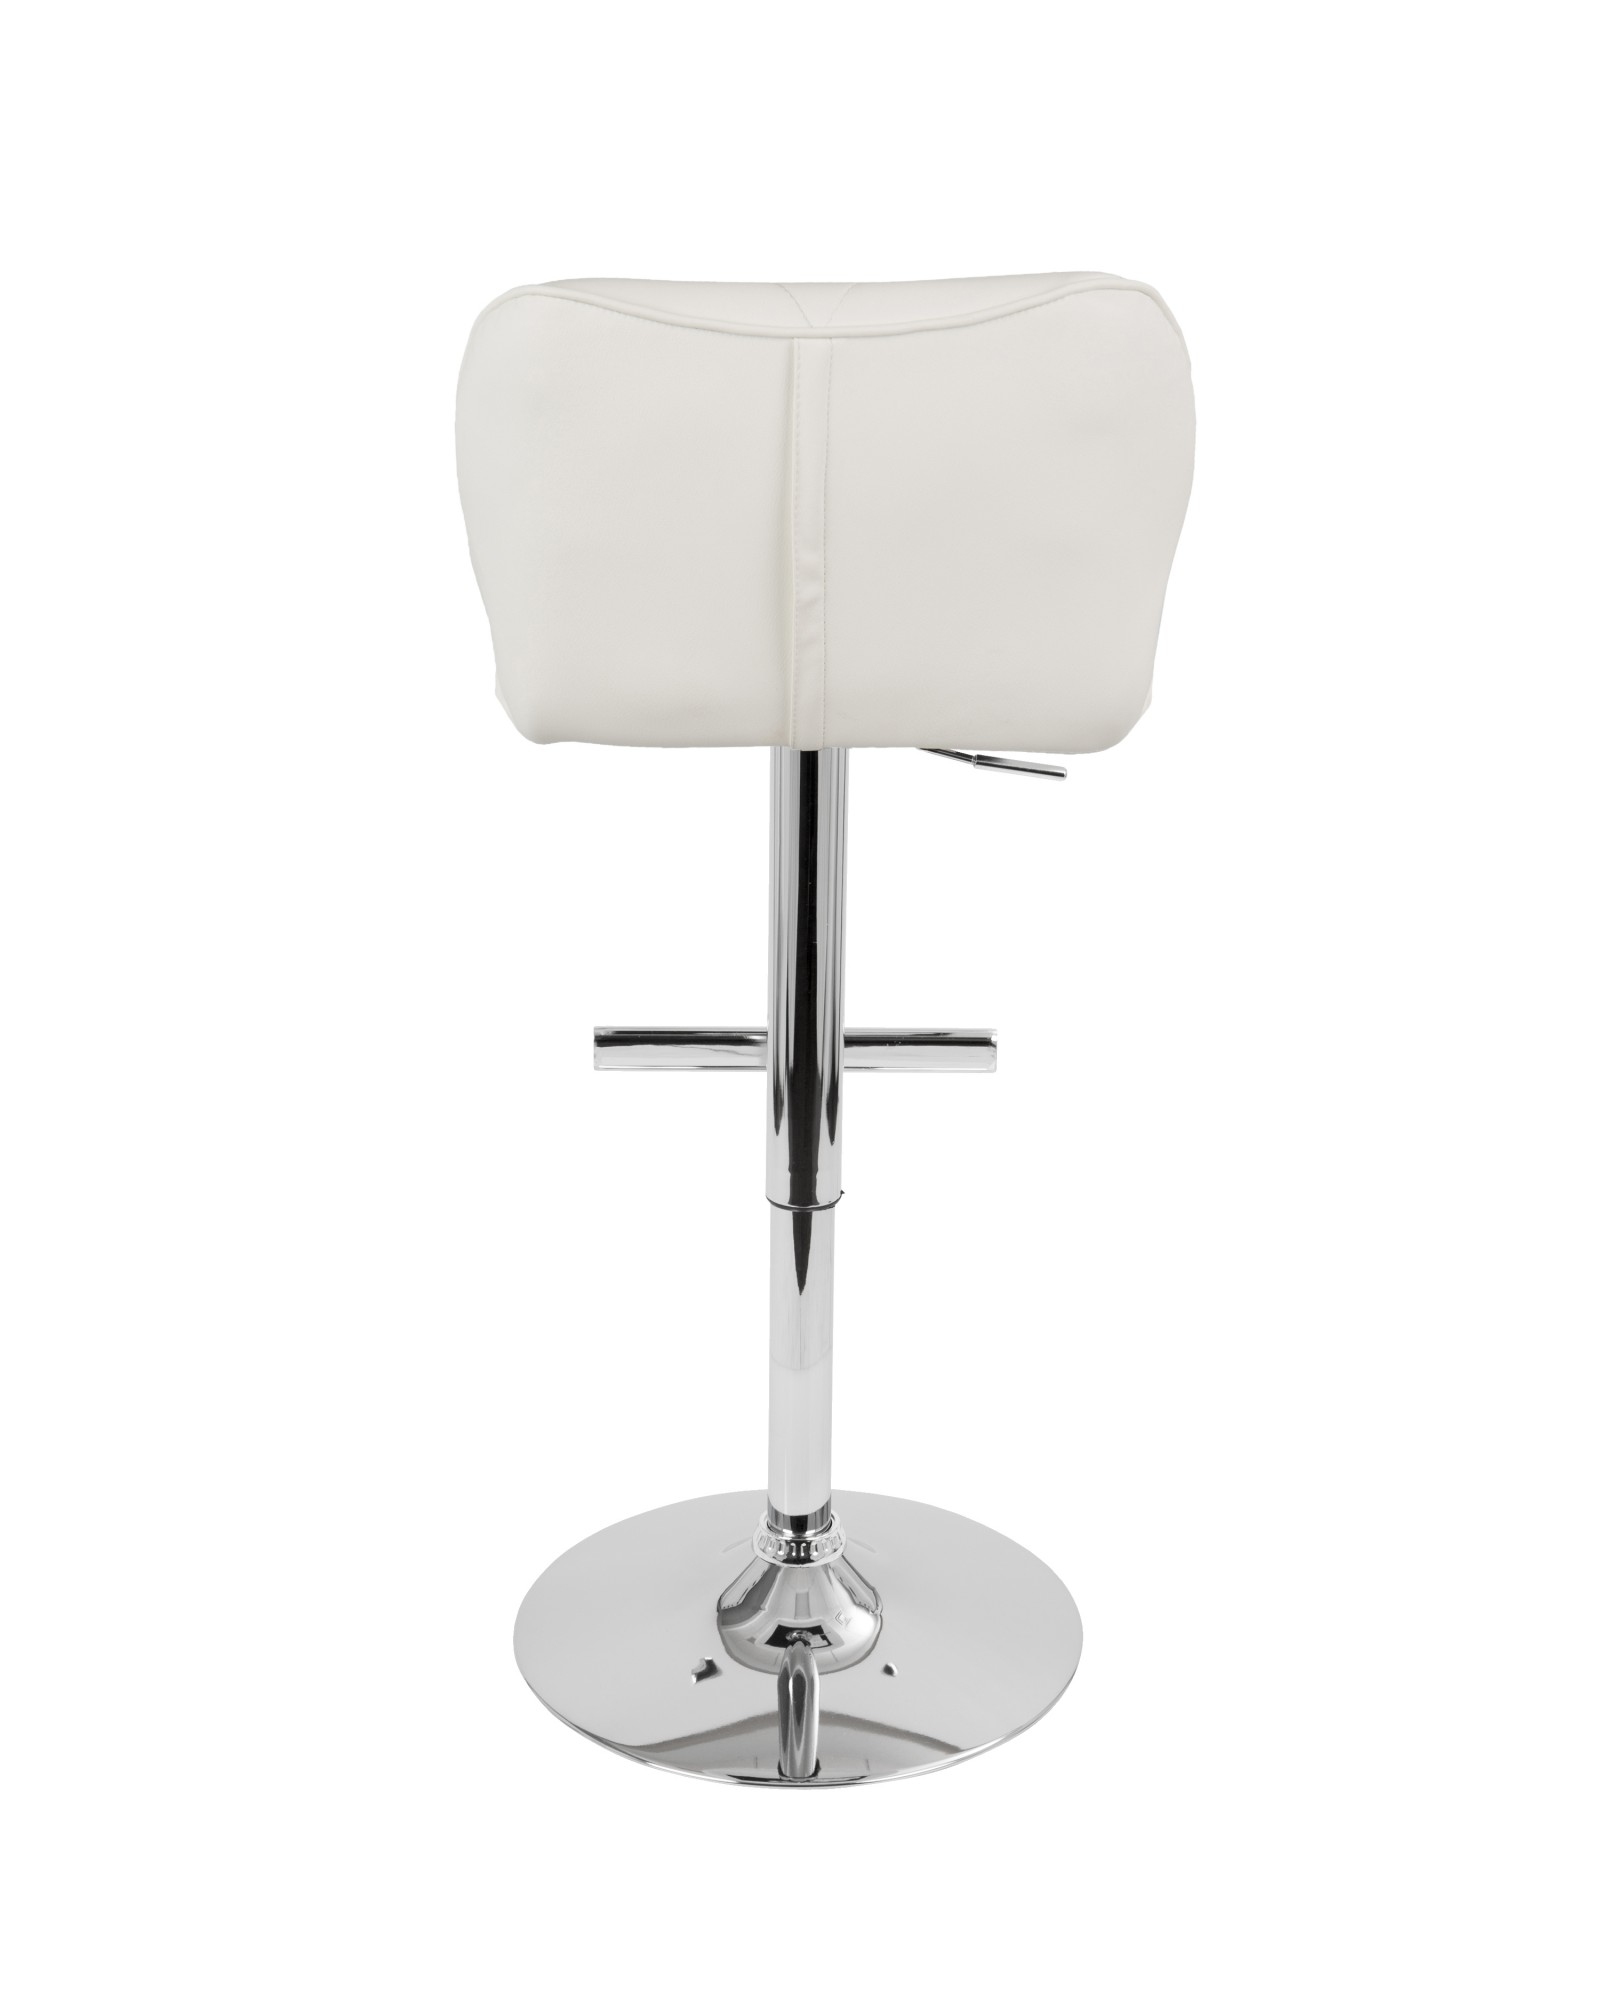 Jubilee Contemporary Adjustable Barstool with Swivel in White Faux Leather